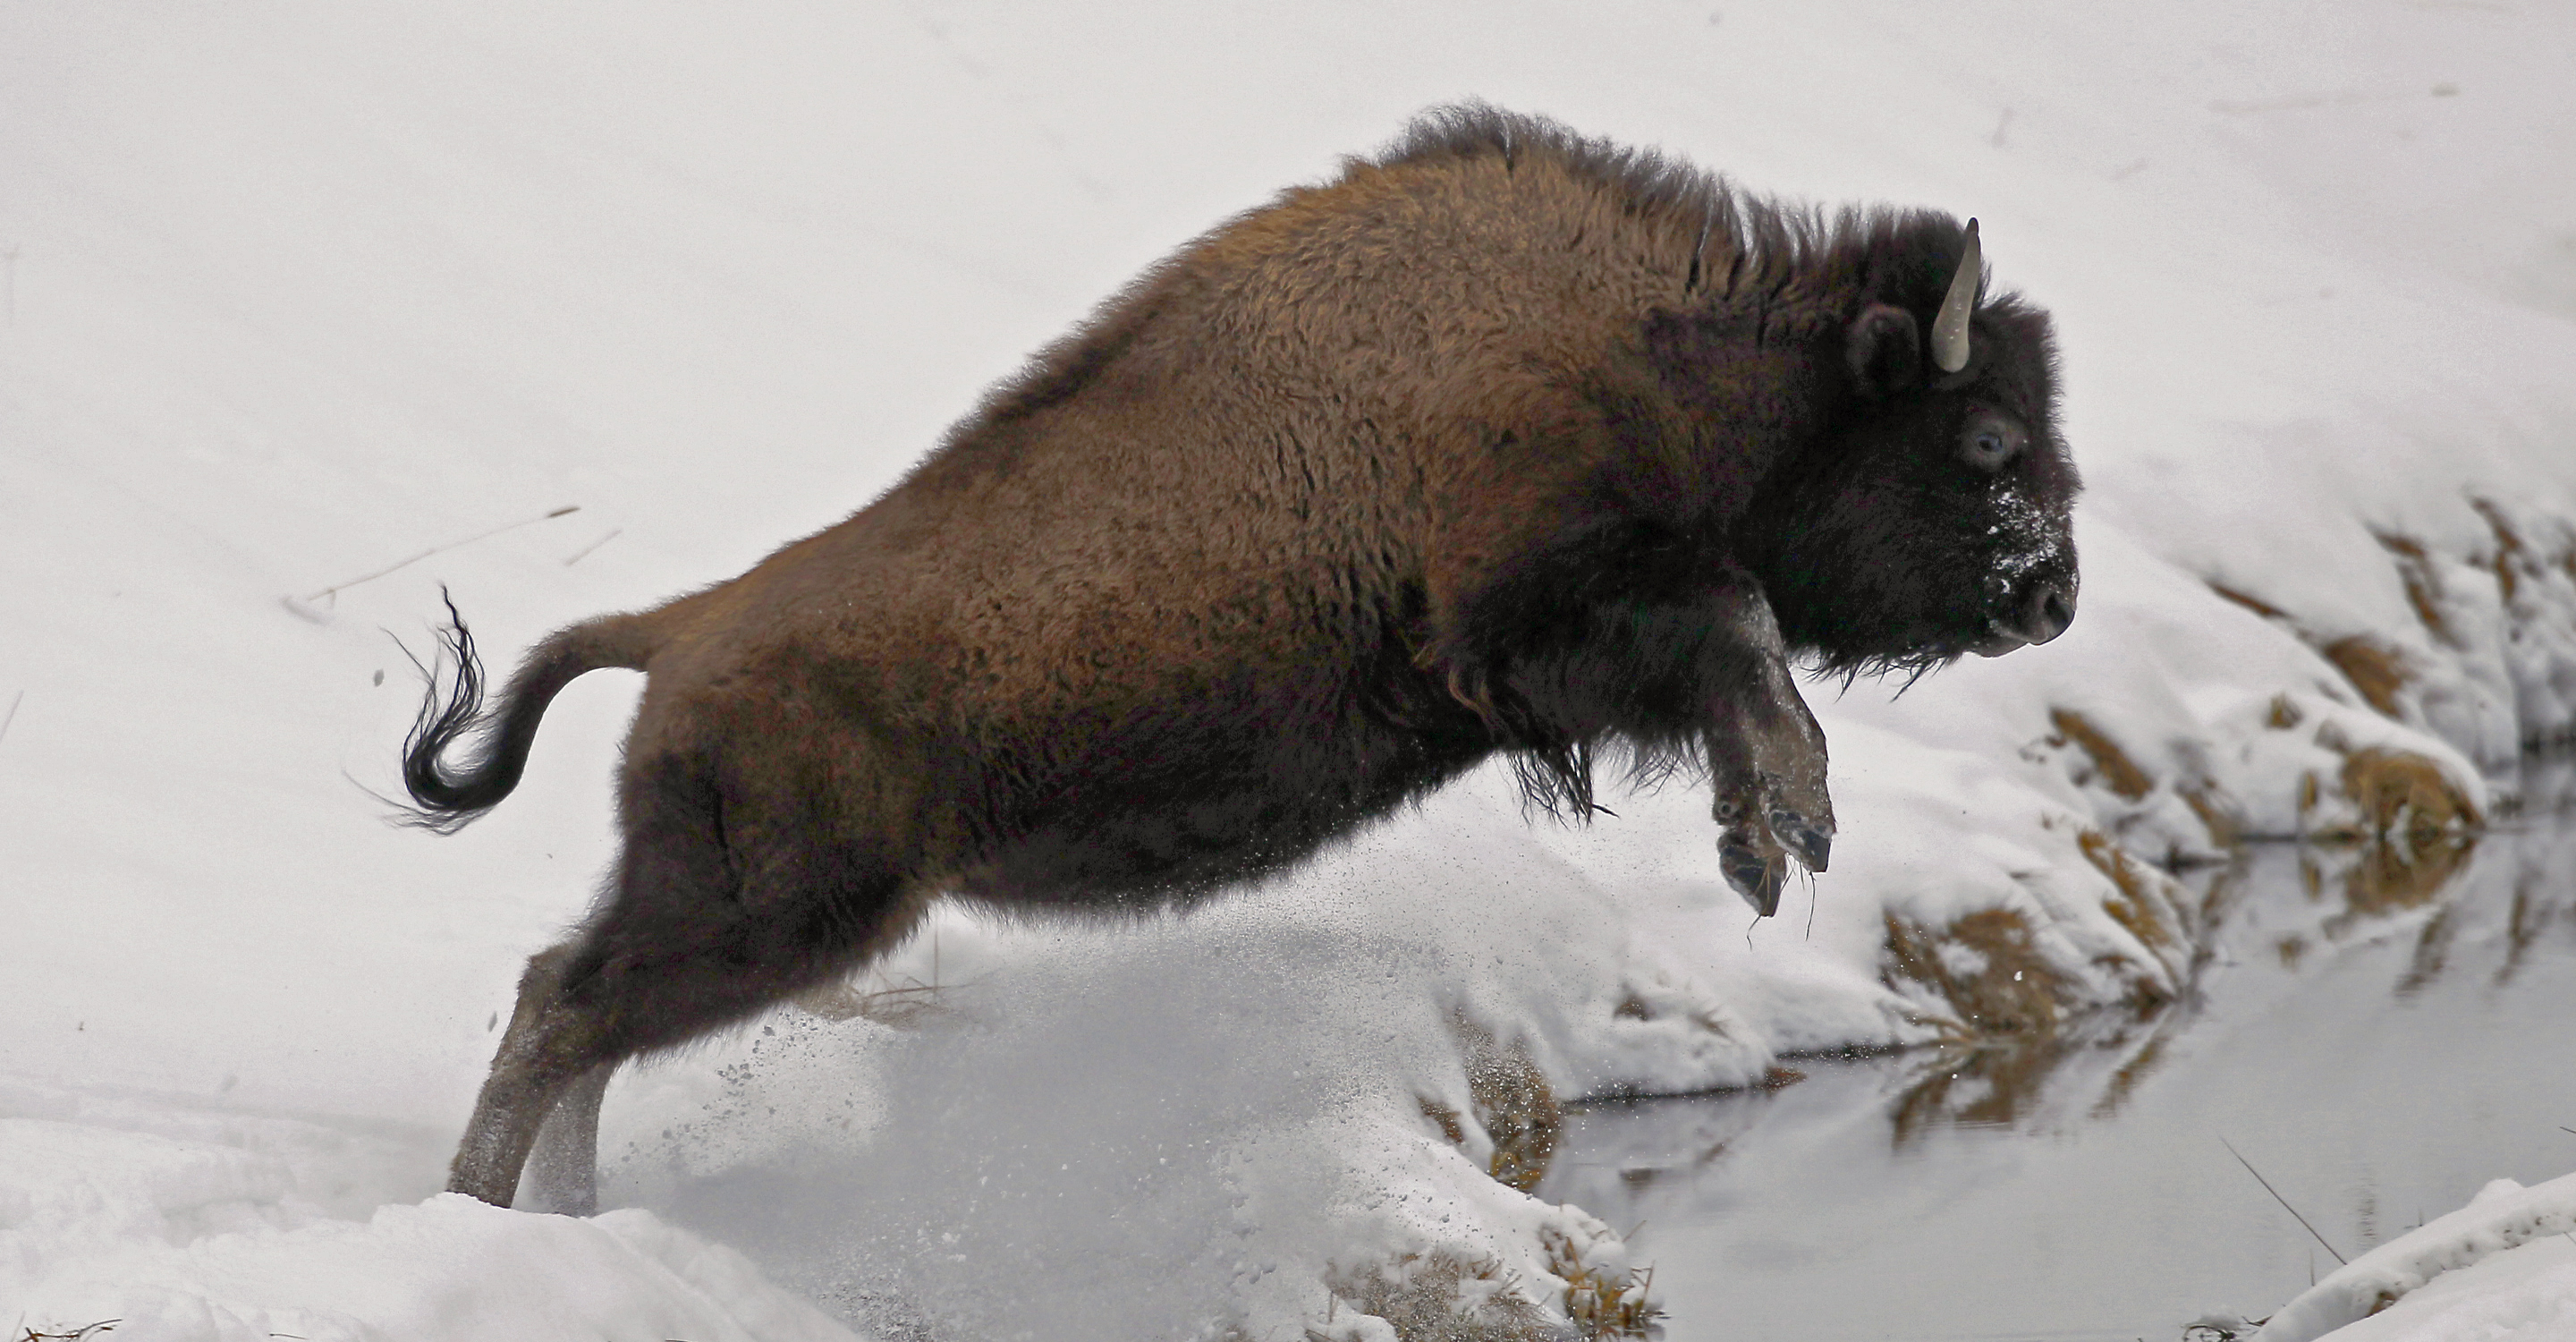 A young American bison leaps over a snowy creek in Yellowstone National Park, United States